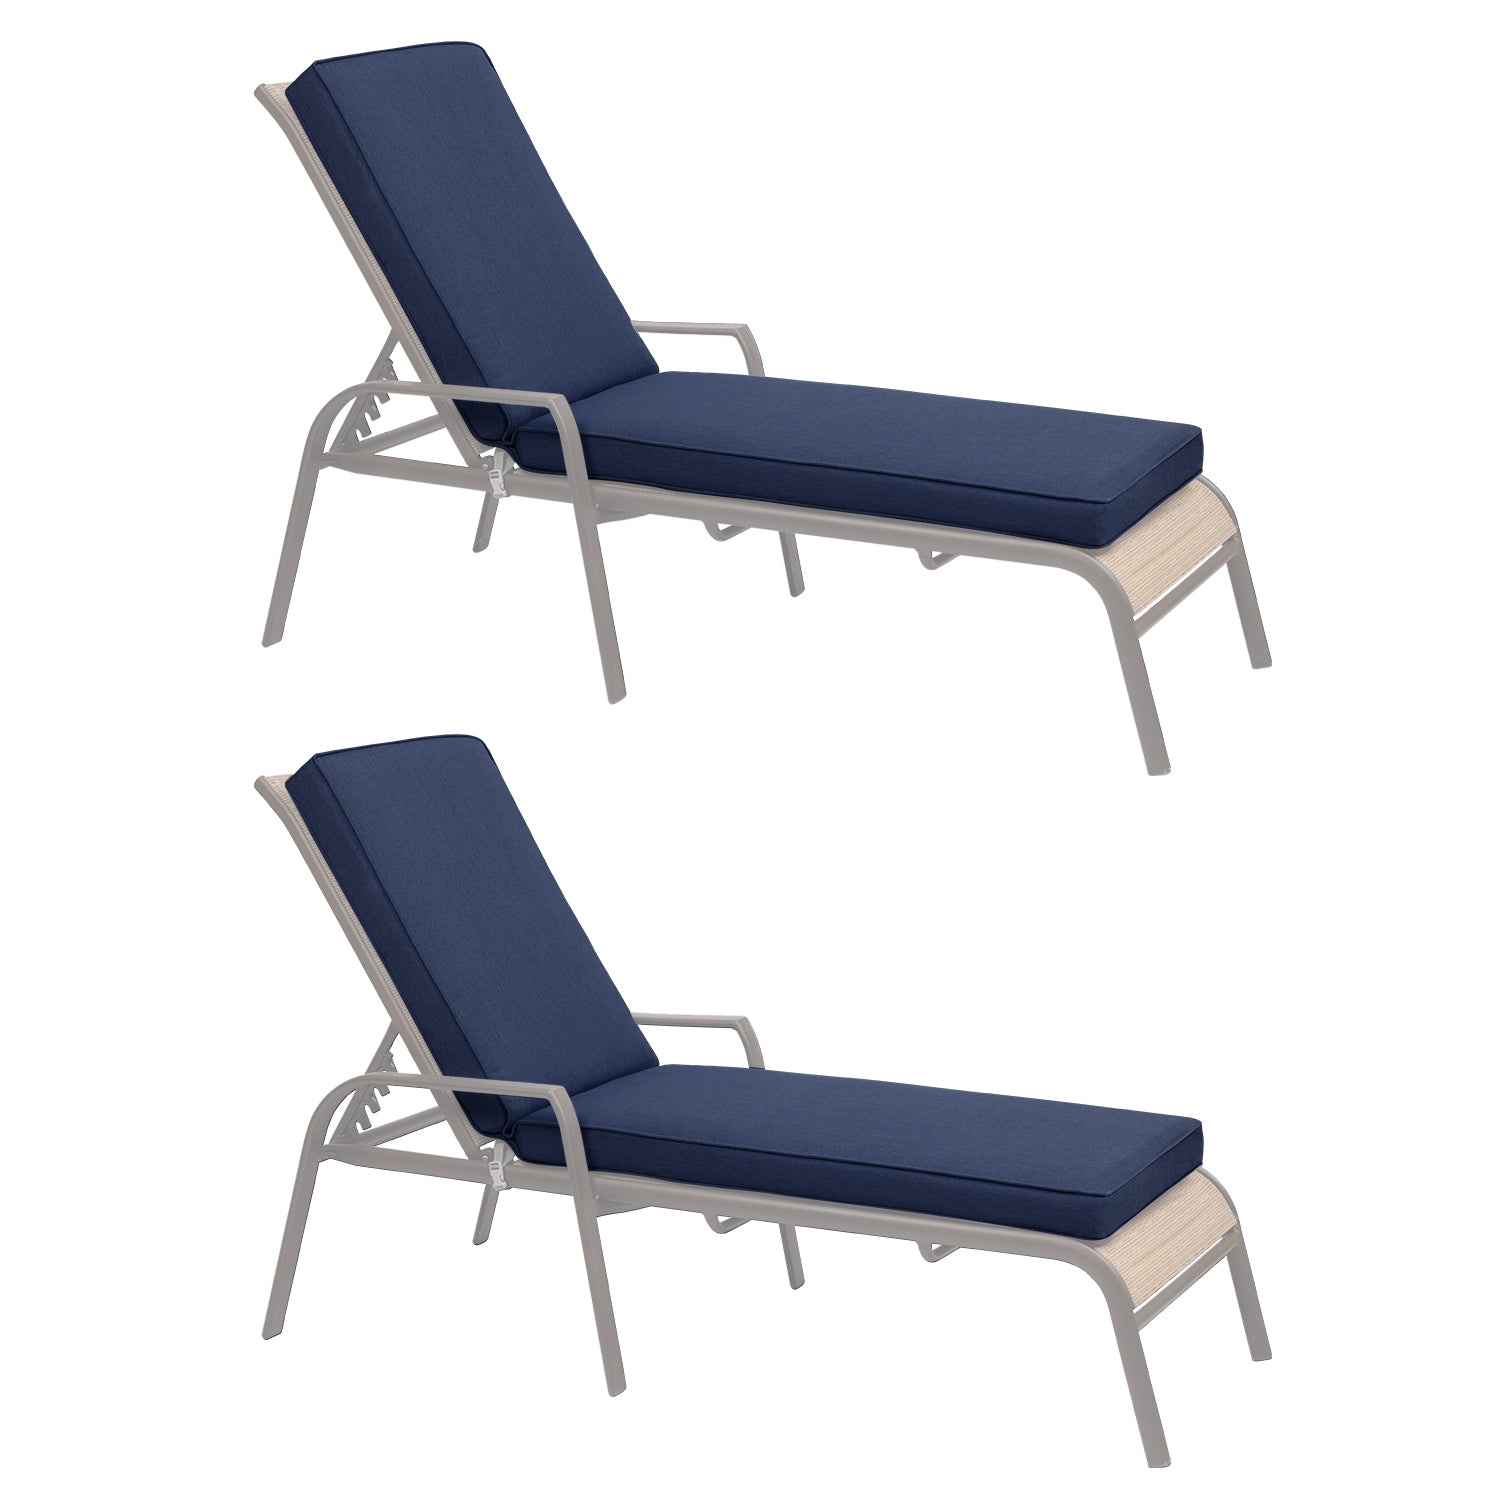 Patio Chaise Lounger Cushions Set of 2, Olefin Fabric, Water-Resistant, 72x21x3 Inches(Only Cushions) CUSHION Aoodor Dark Blue  